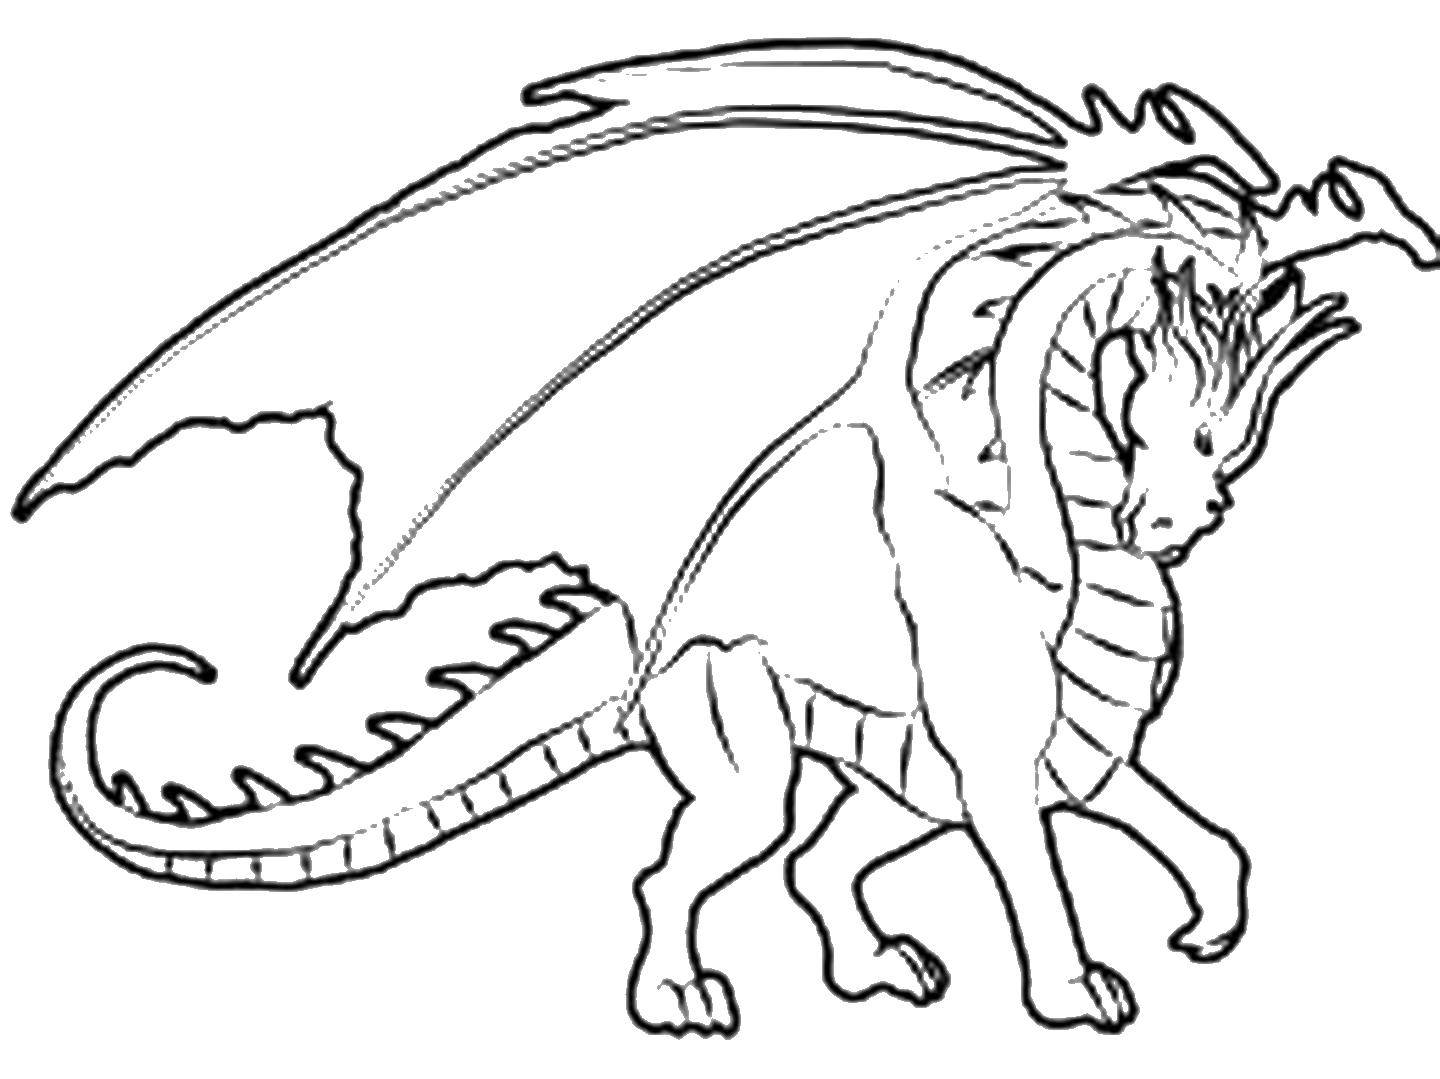 Coloring Fire dragon. Category Dragons. Tags:  dragon fire.